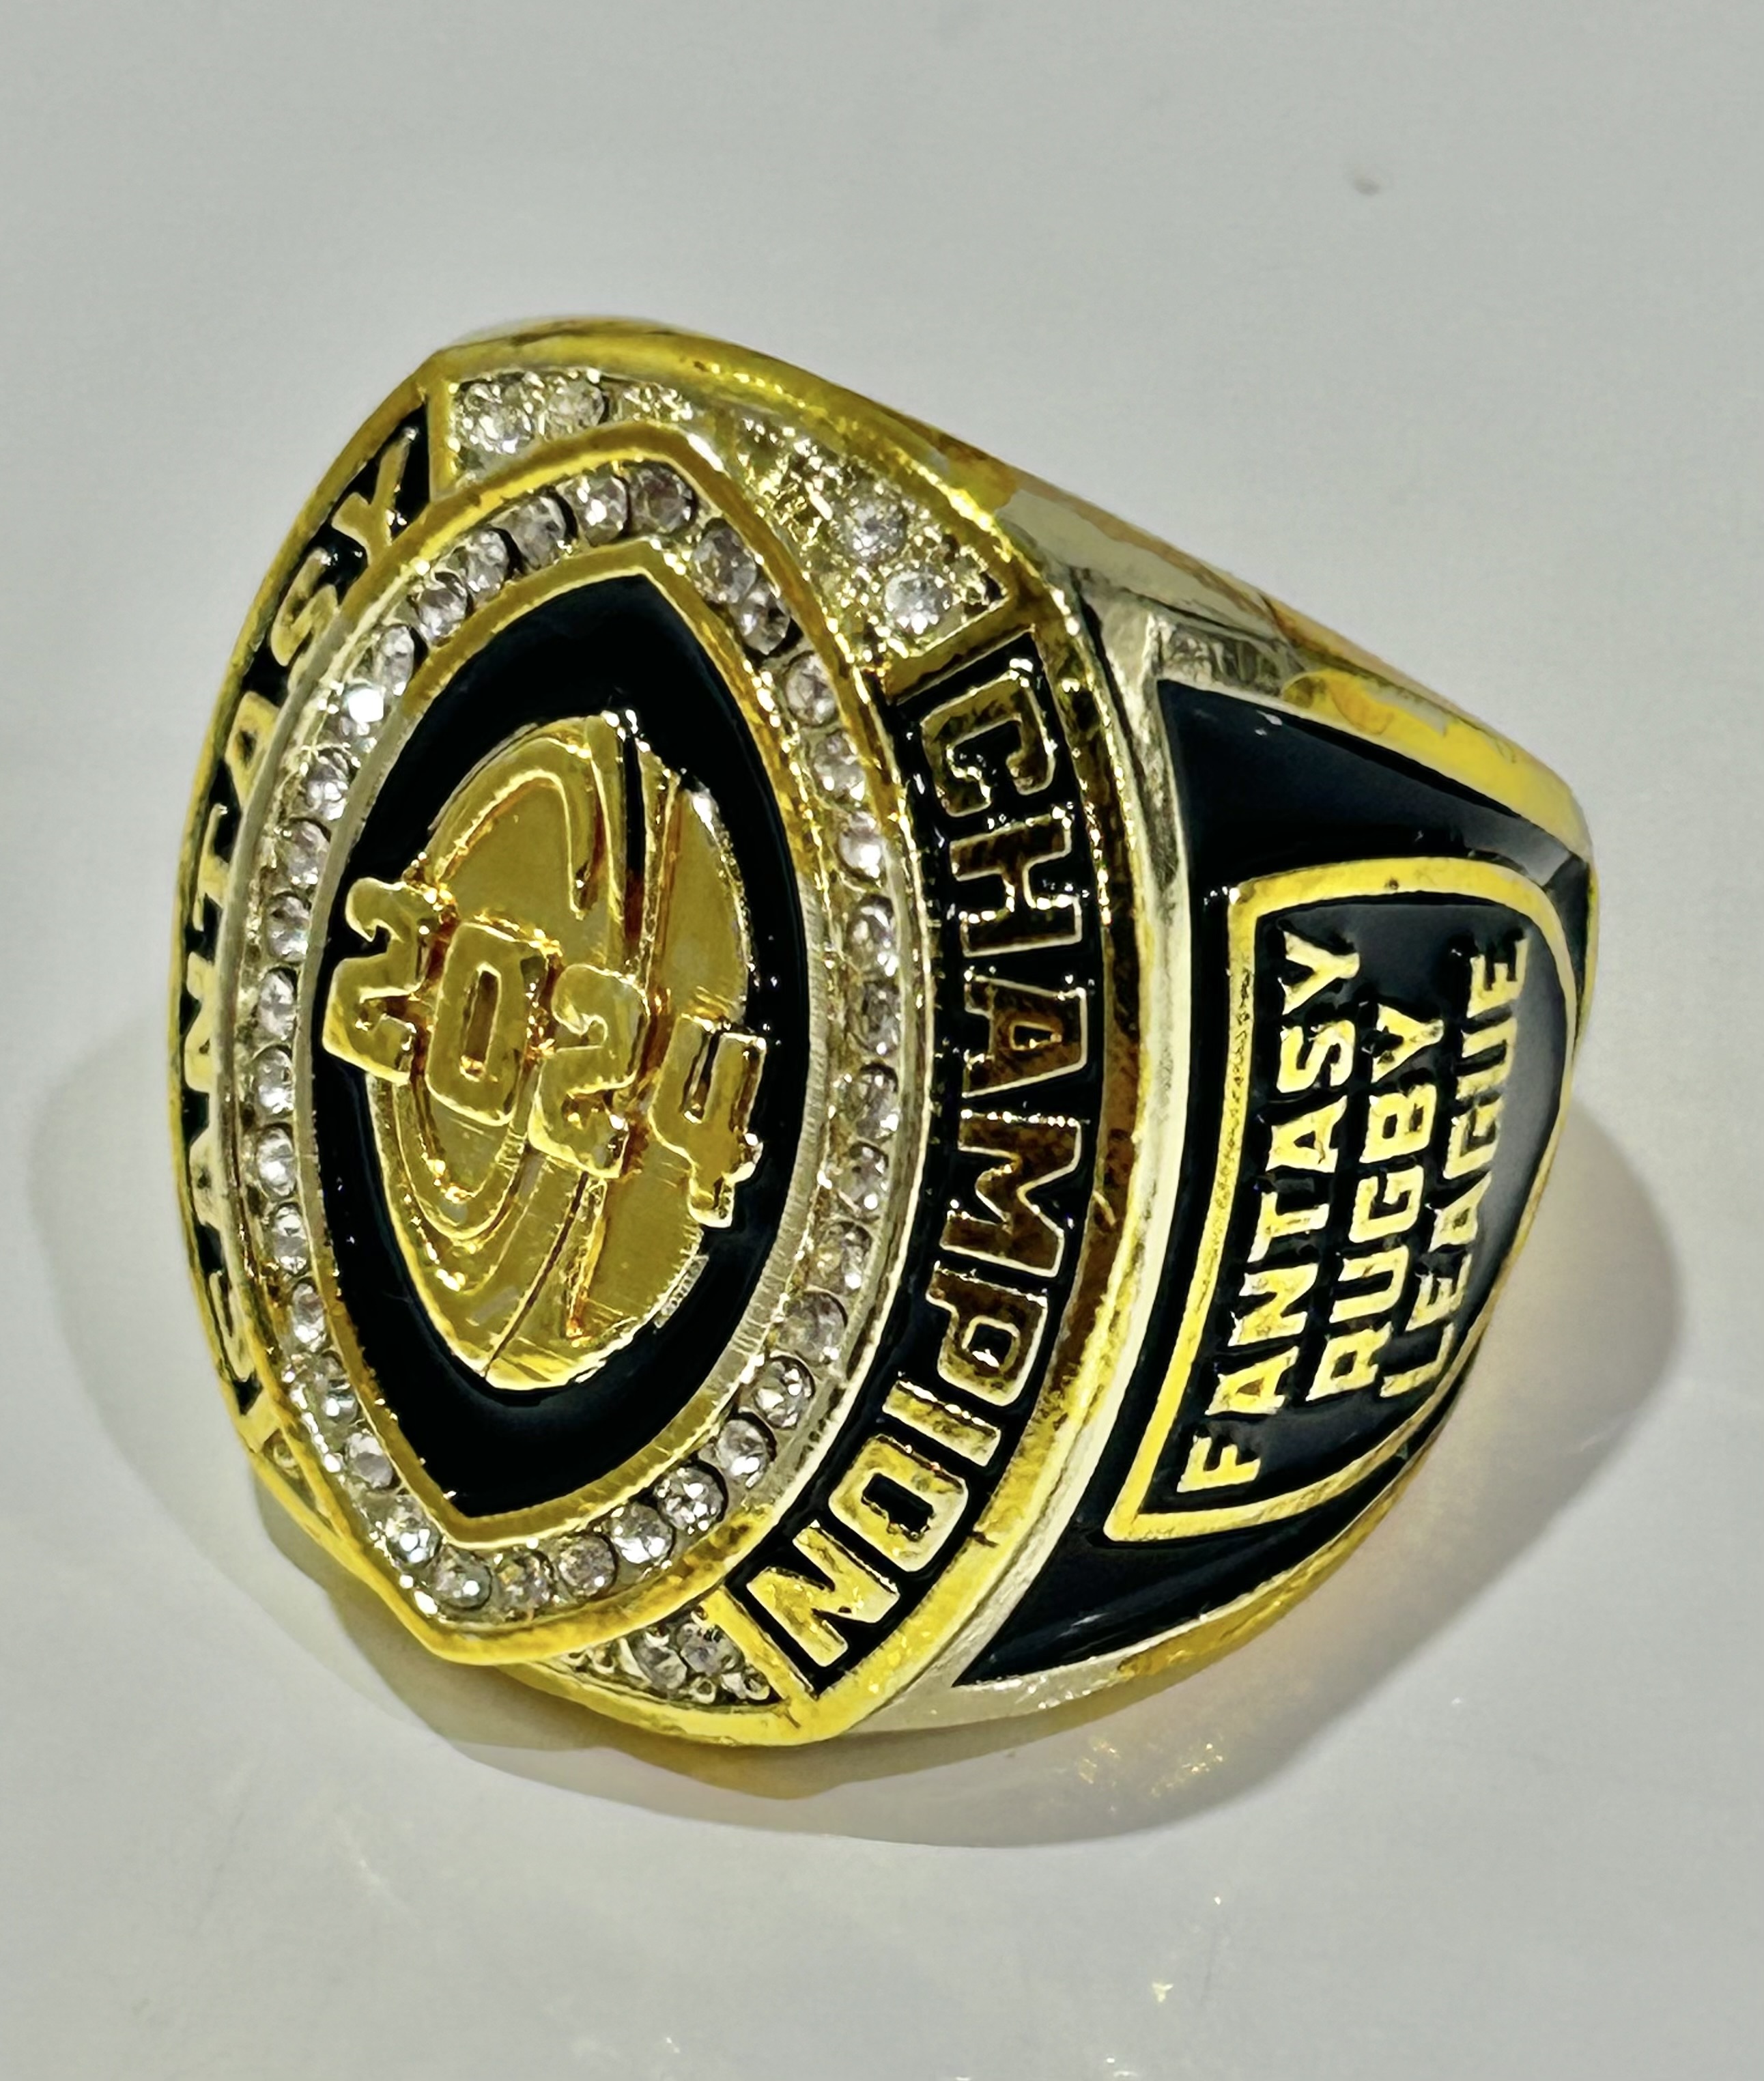 Champship Ring: Fantasy Rugby League